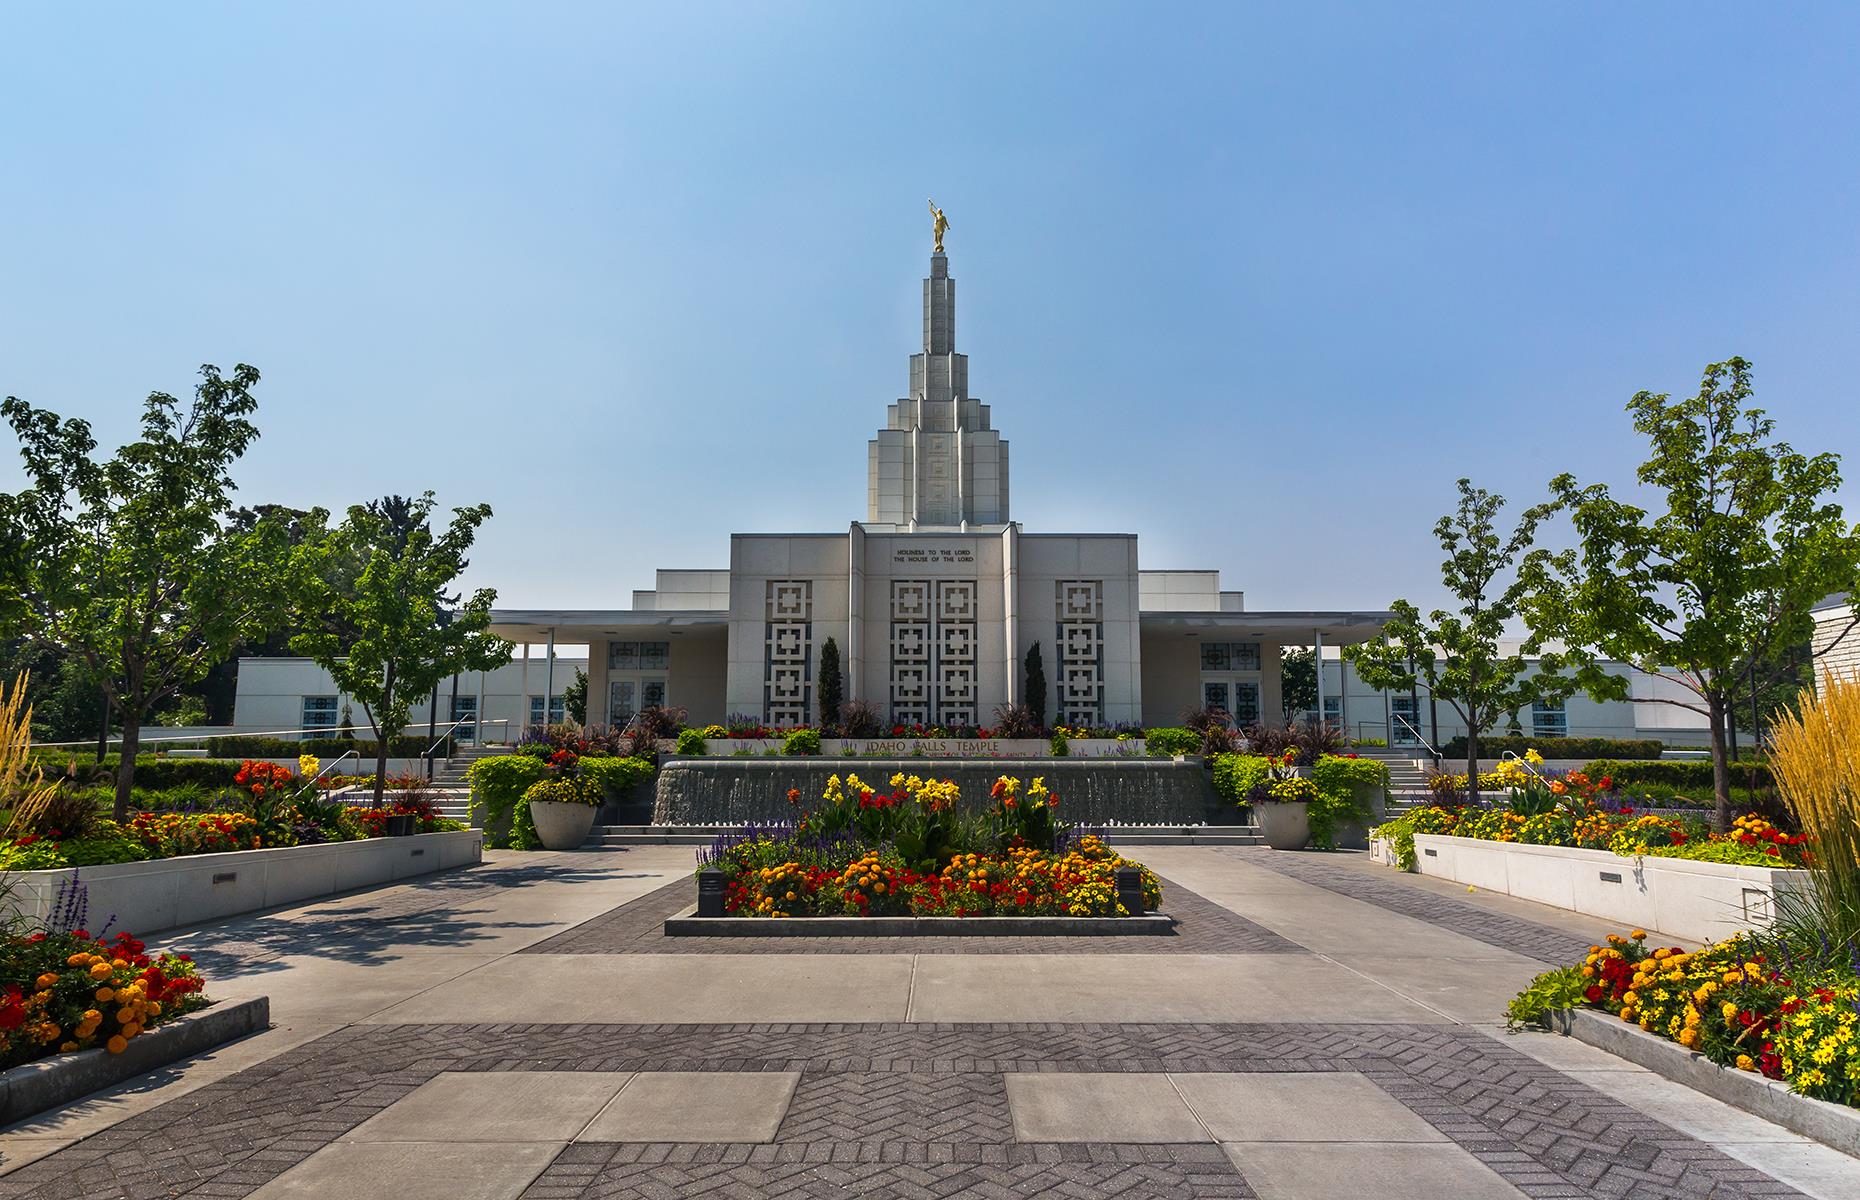 <p>One of the oldest operating temples of The Church of Jesus Christ of Latter-day Saints (informally known as the Mormon Church), the Idaho Falls Temple was opened in 1945 and is a stunning example of Art Deco architecture. The white granite facade appears to glisten in daylight, while its spire, topped by a golden statue of the Angel Moroni, stands 143 feet tall (44m). Although it's an active place of worship, visitors can take a tour of the temple grounds and learn about the history of the fascinating building and the church.</p>